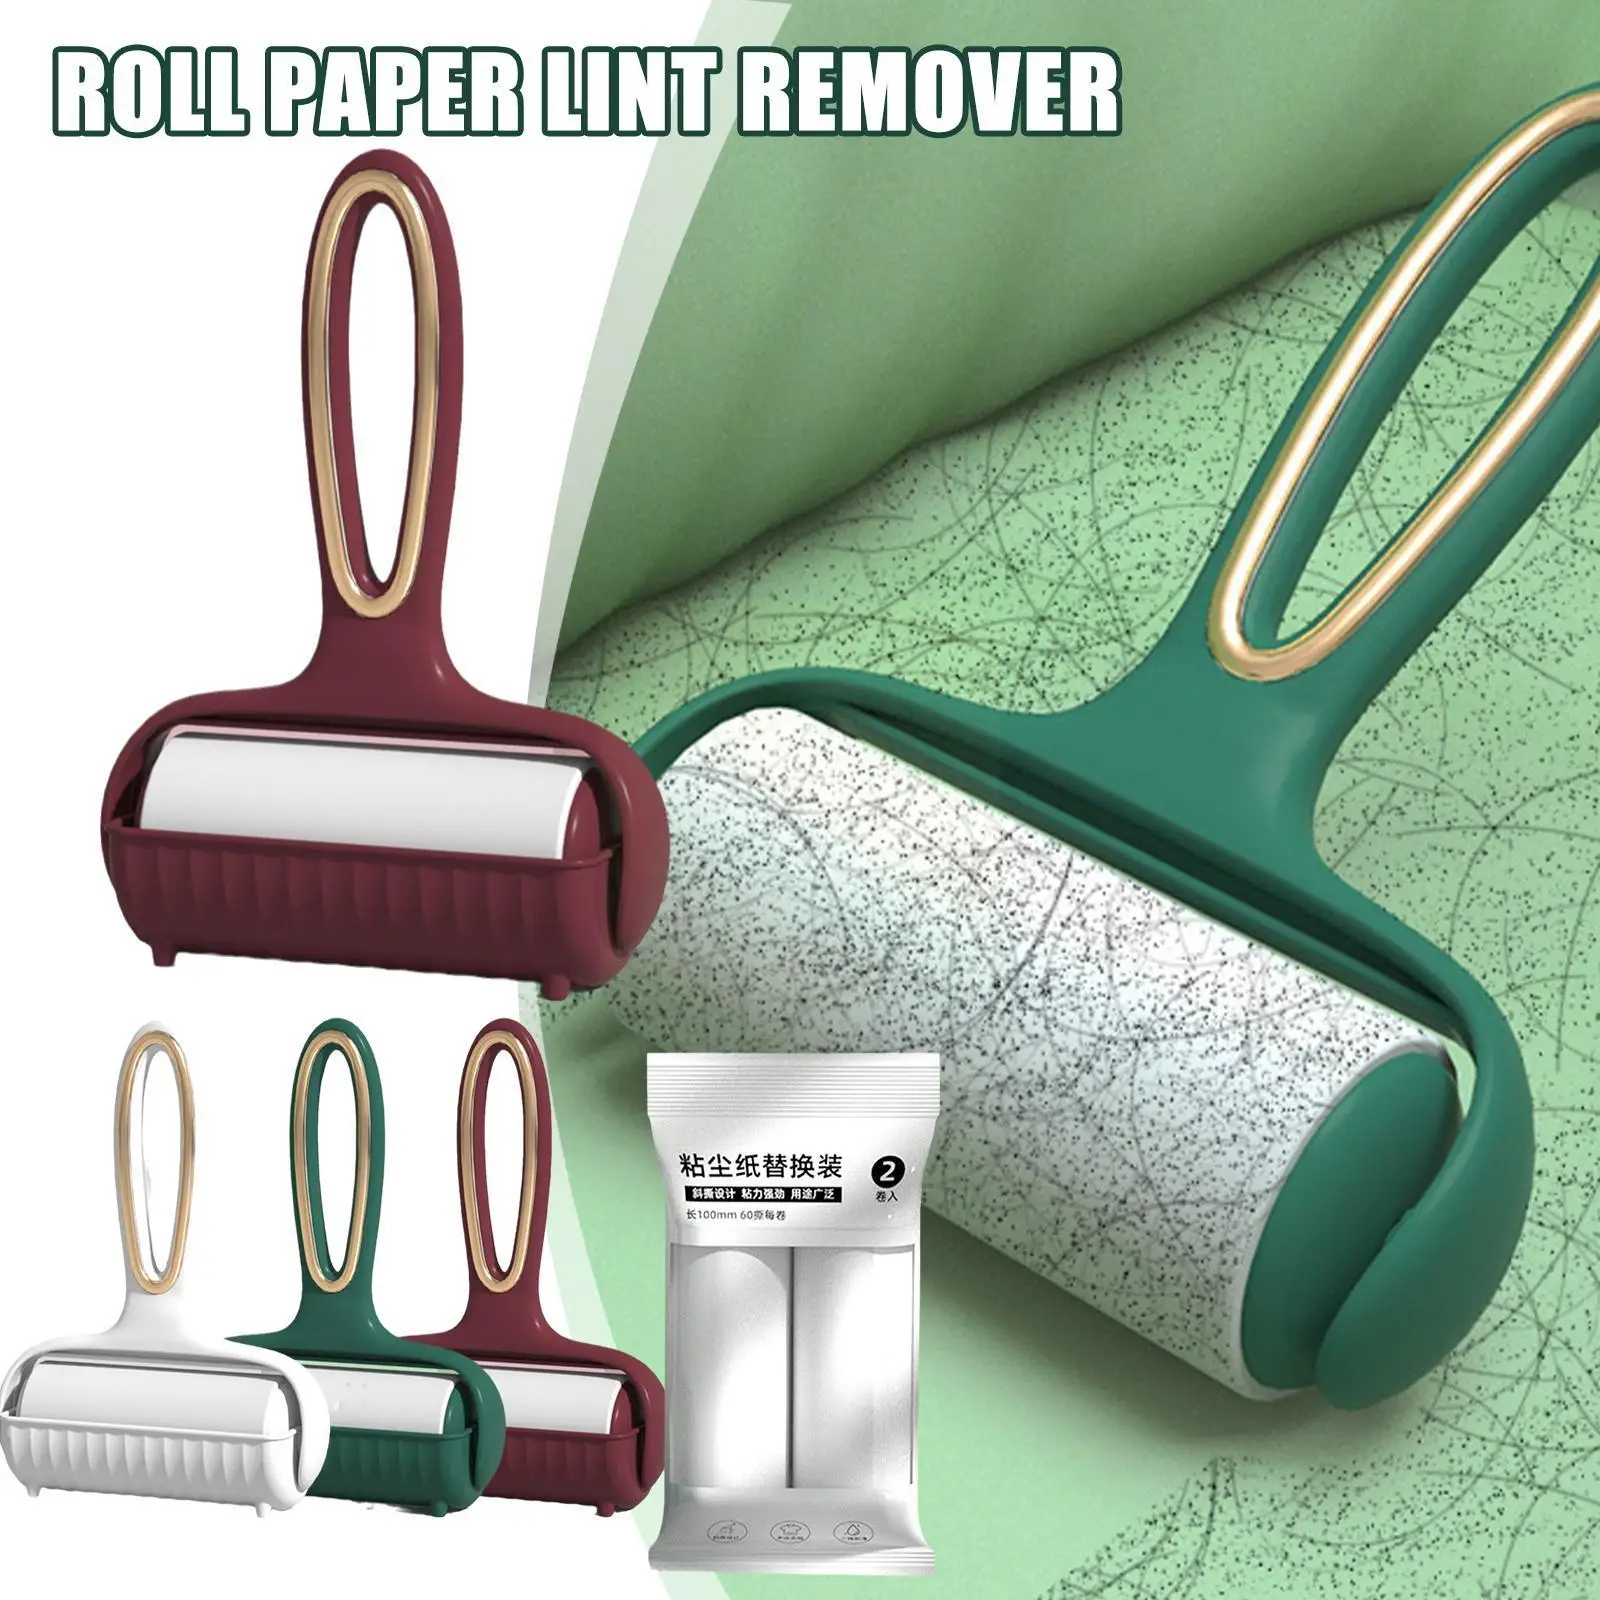 

Lint Remover Hairball Trimmer Sticker Tearable Roll Home Sticky Dust Wiper Pet Tools Roller Portable Hair Remover Paper P2h9